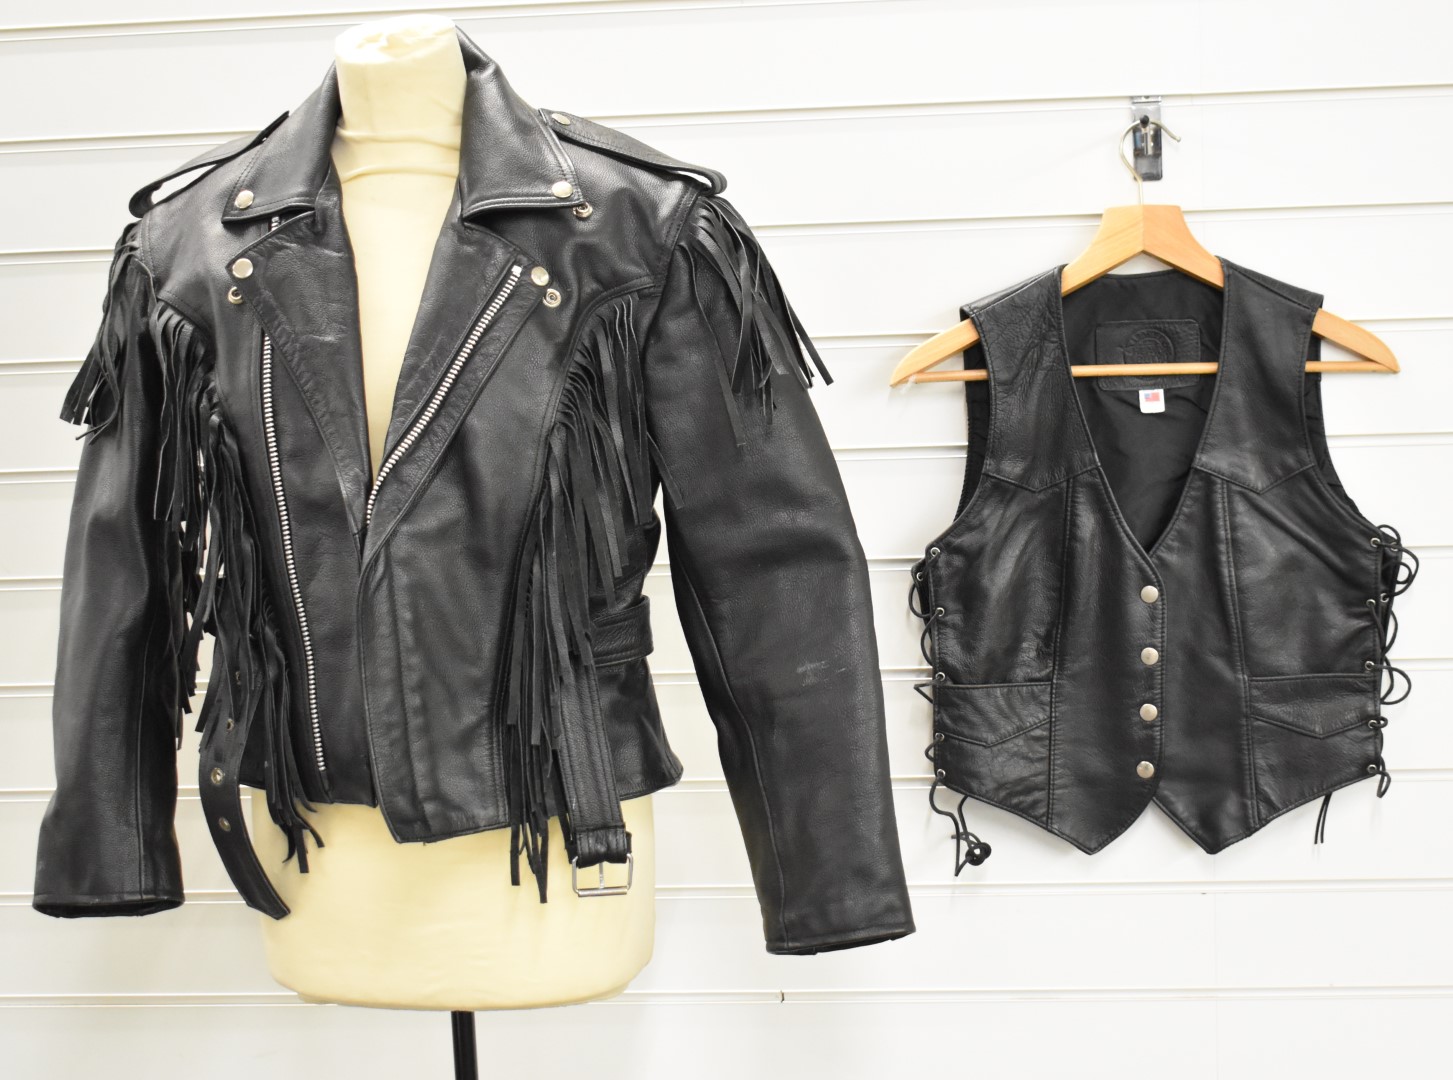 Hunter Class fringed leather motorcycle jacket and a waistcoat by Heavy Duty Leather Company, both - Image 2 of 24